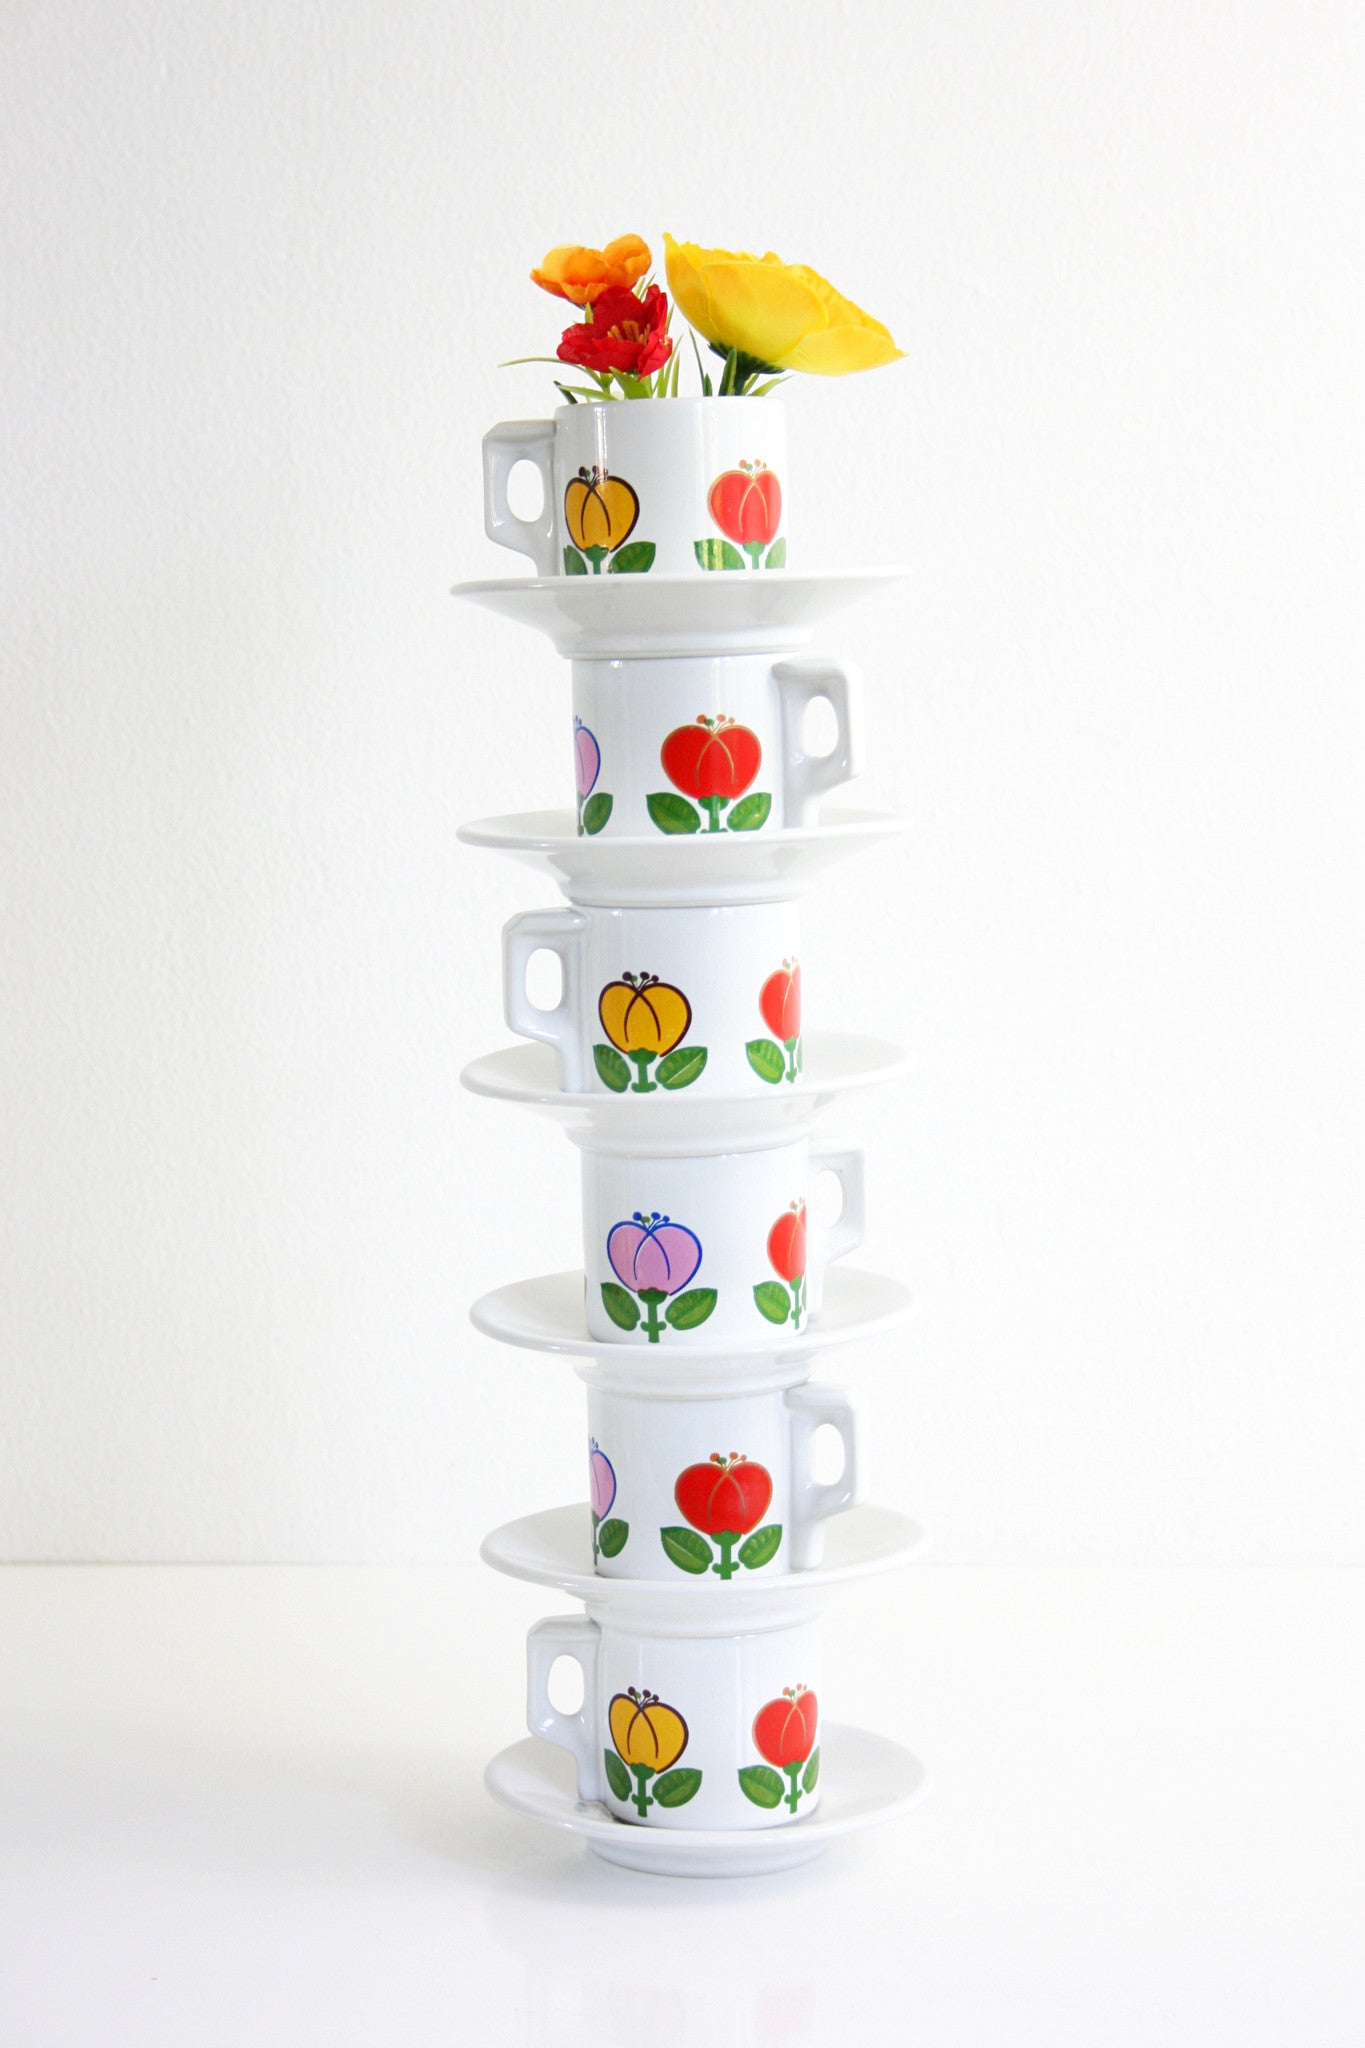 SOLD - Mid Century Tulip Demitasse Cups by ACF Italy